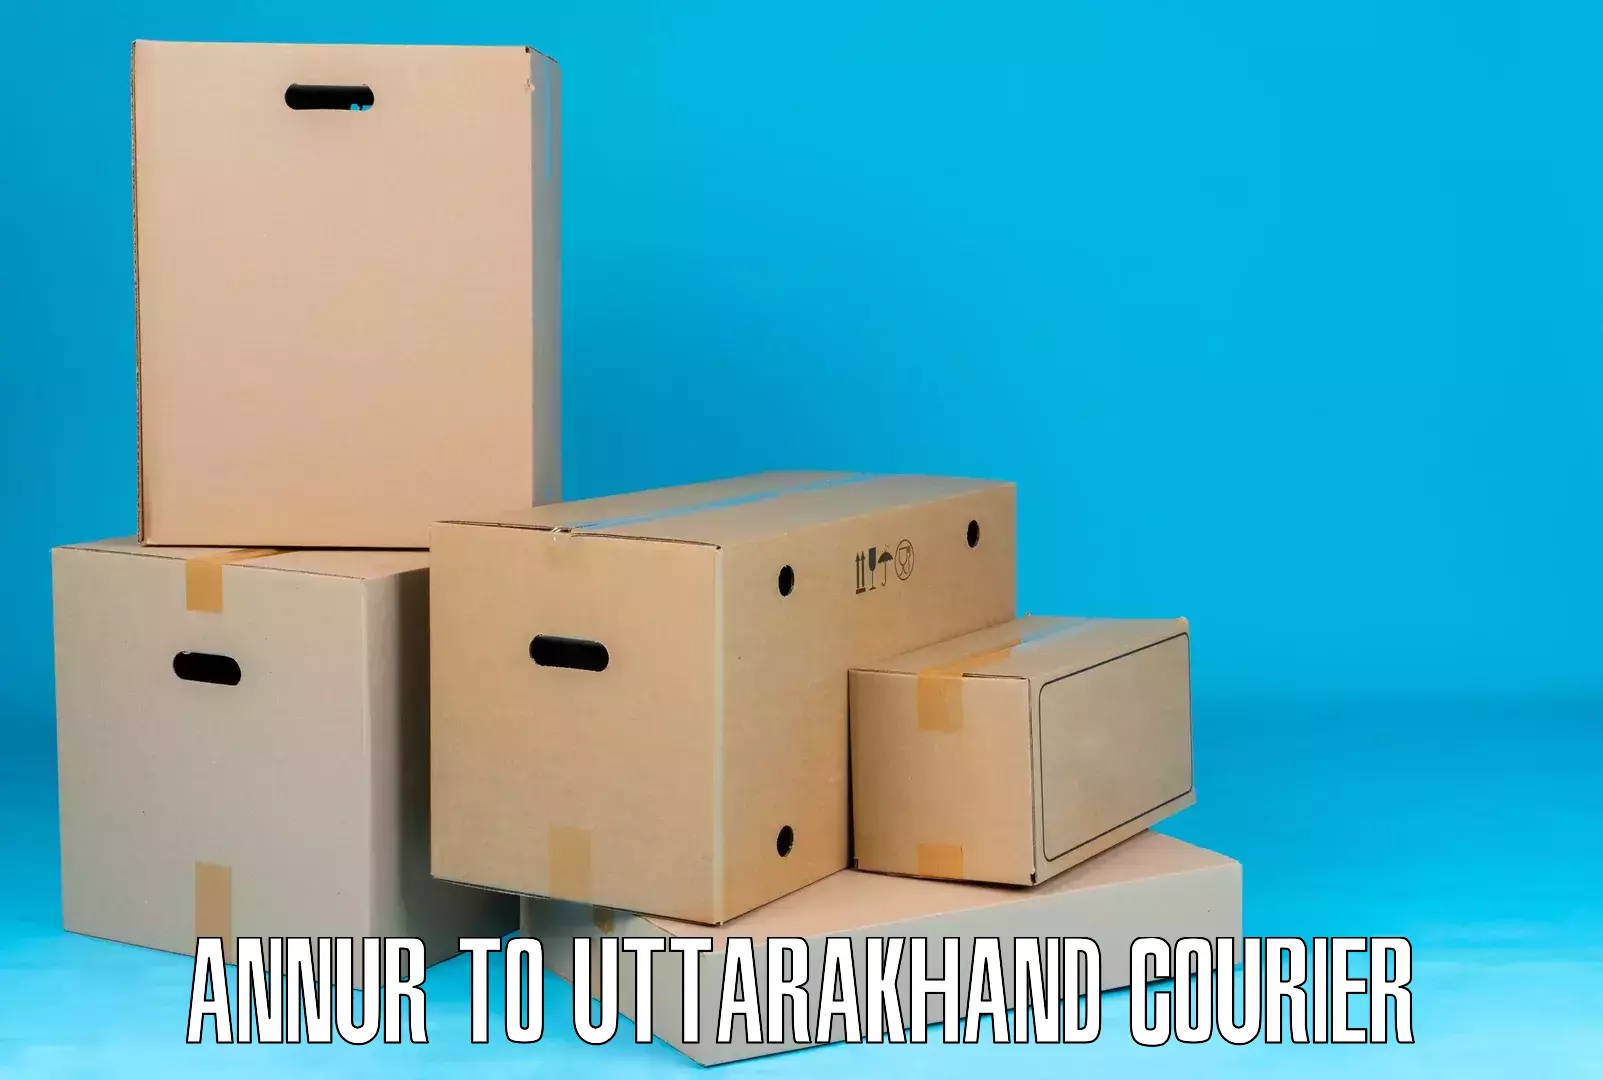 State-of-the-art courier technology in Annur to IIT Roorkee